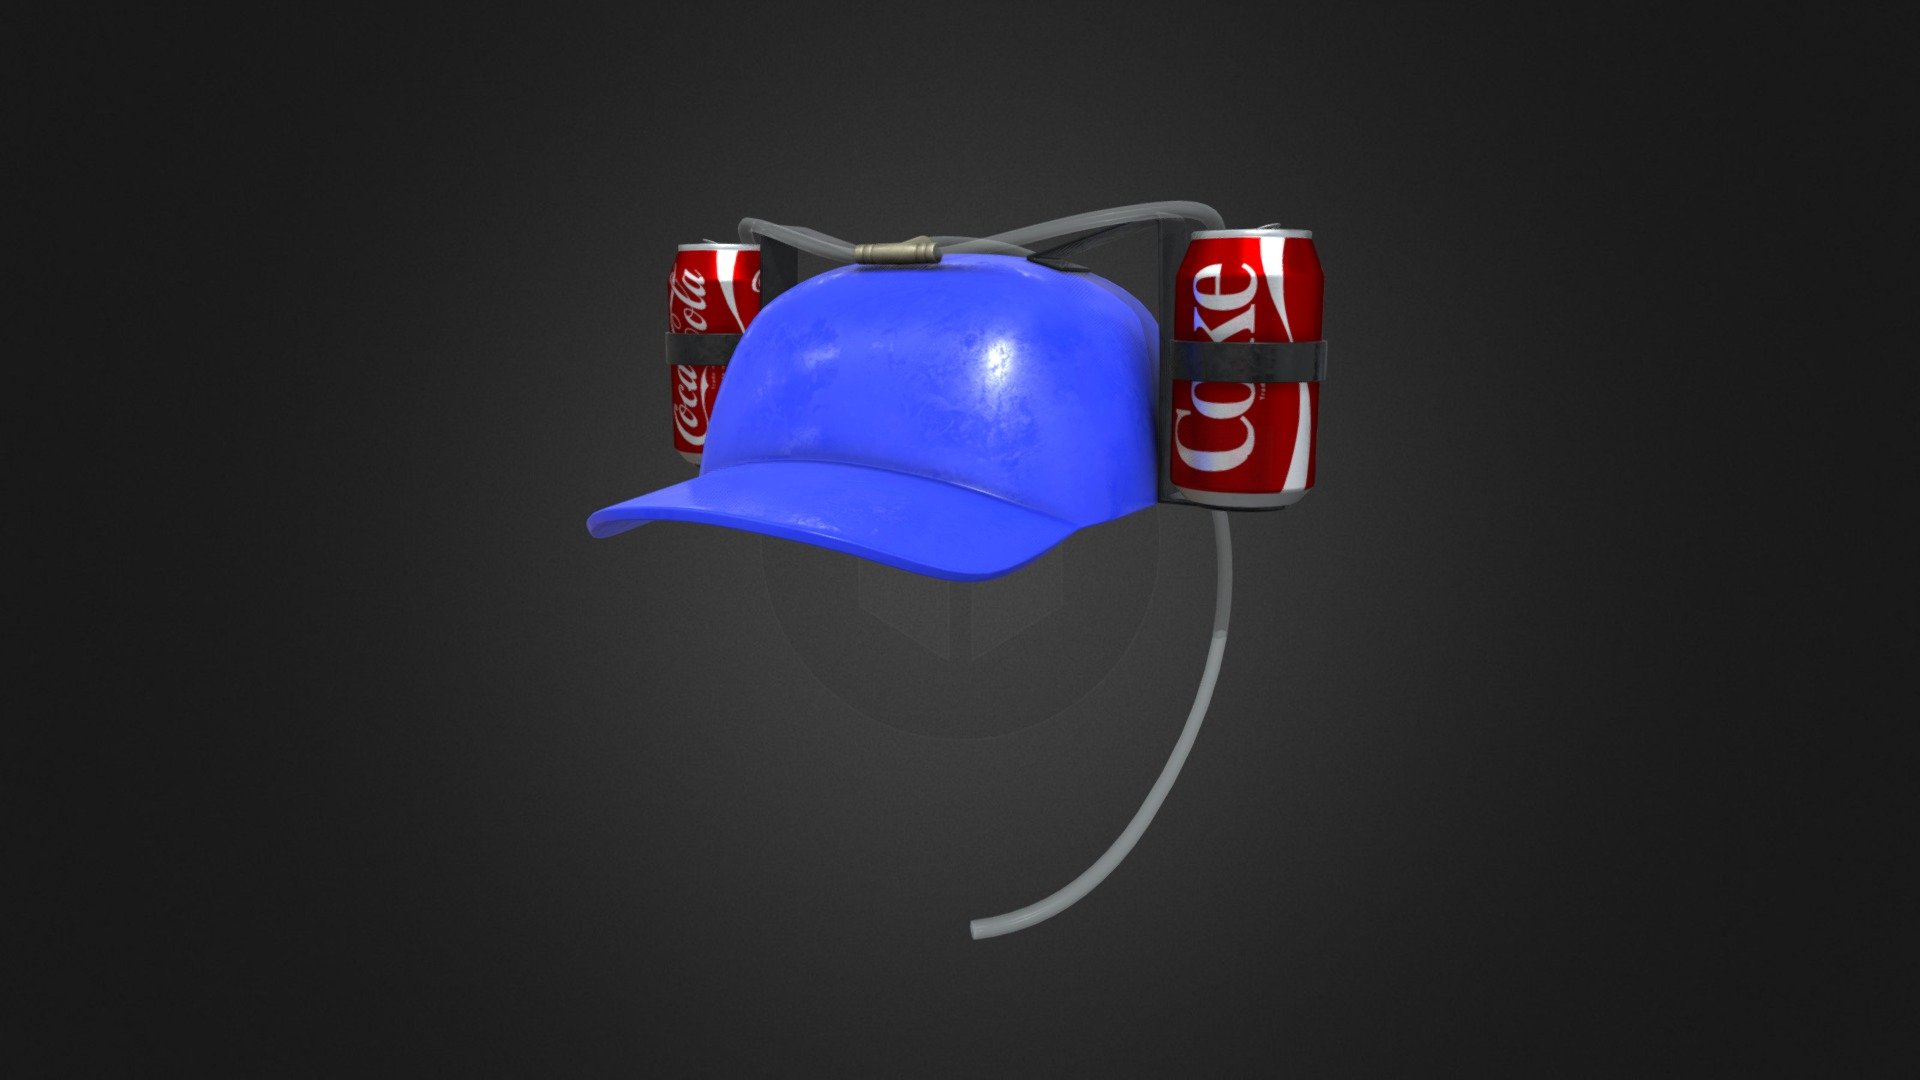 Drinking hat

OBJ and 2048x2048 PNG textures

Texture include: Base Color, Metallic, Normal, Roughness

8,796 poly - Drinking hat - 3D model by -eugenie- 3d model